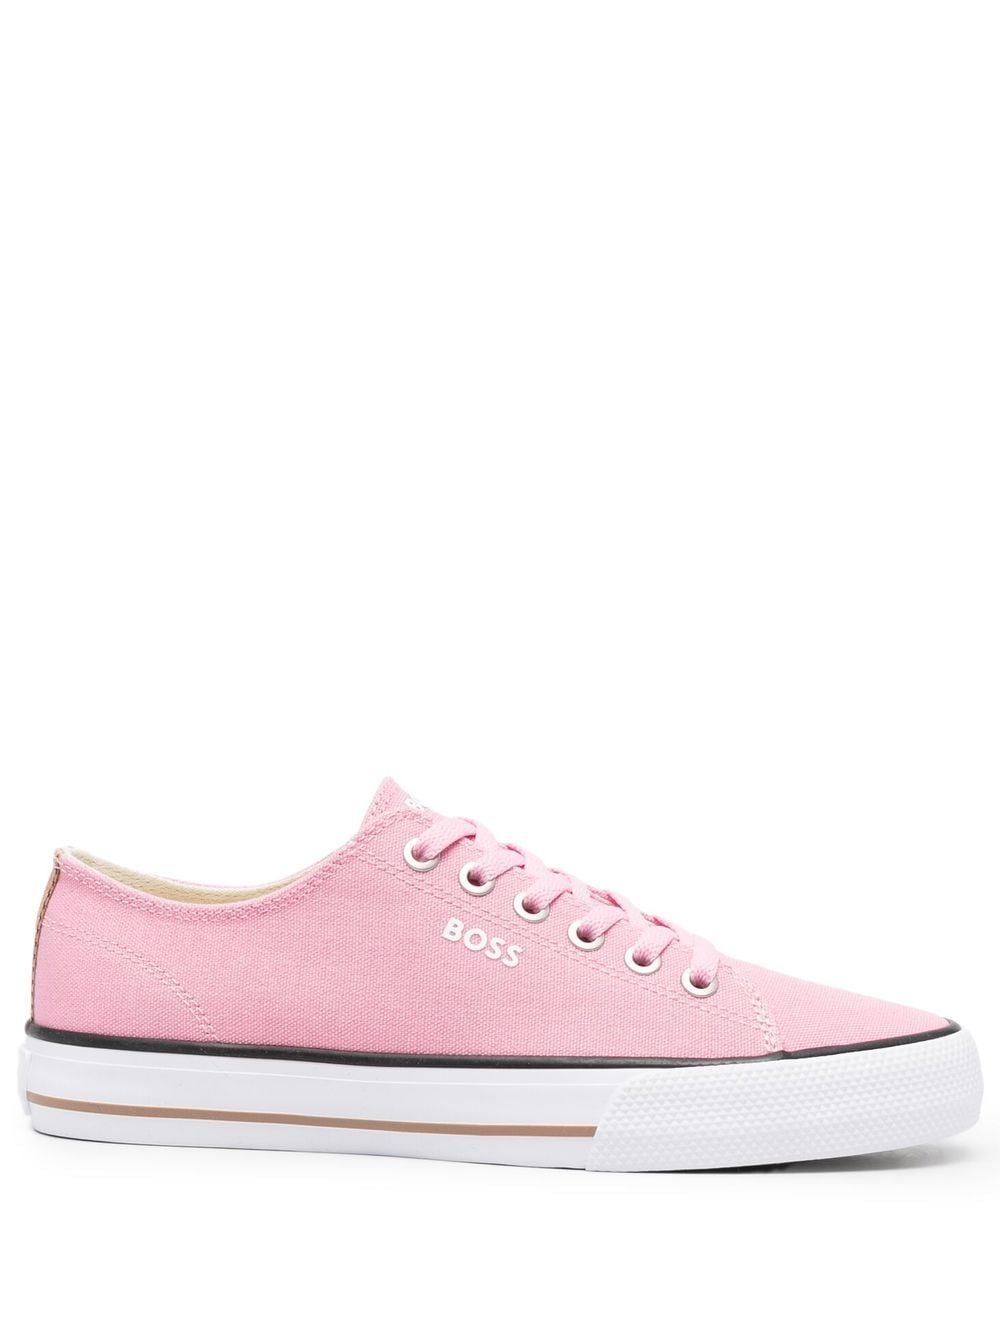 Hugo Boss Aiden Low-top Lace-up Sneakers In Pink